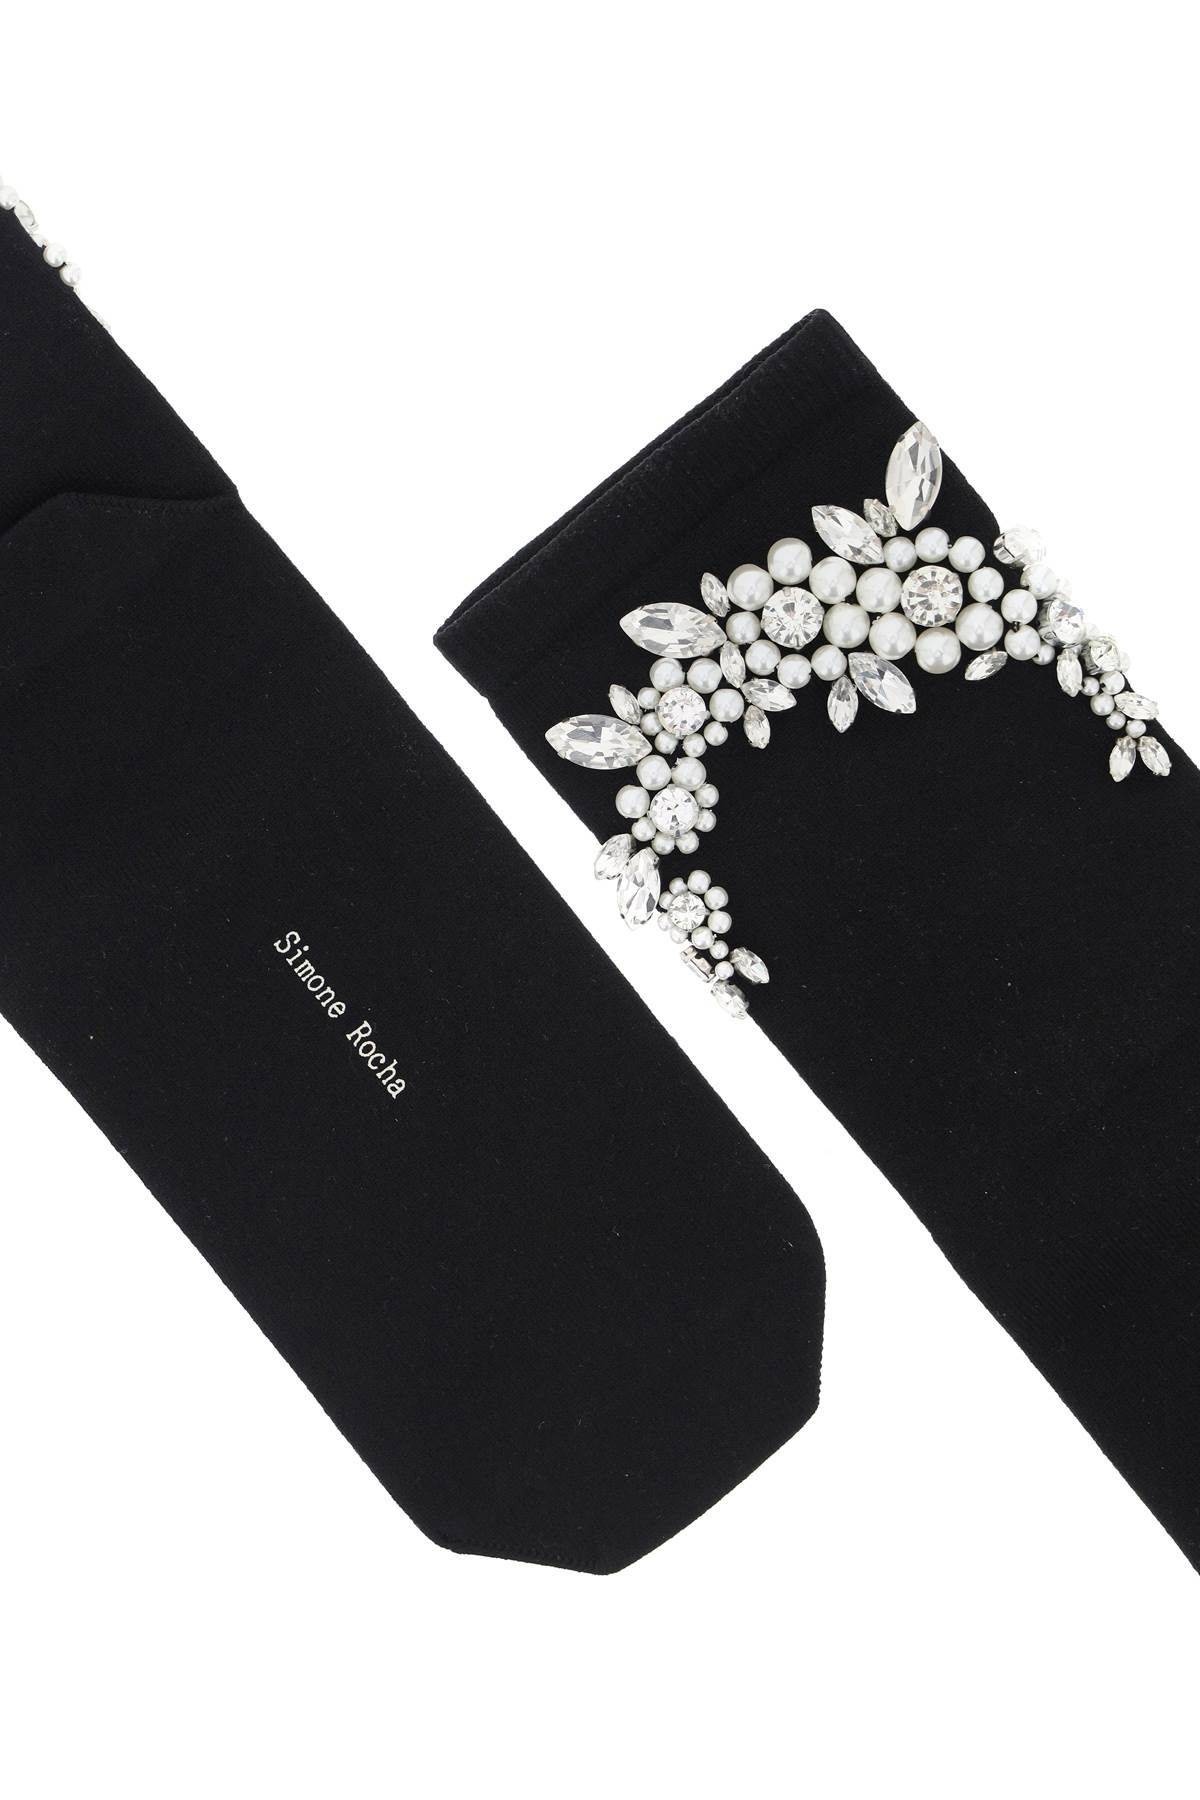 SOCKS WITH PEARLS AND CRYSTALS - 3